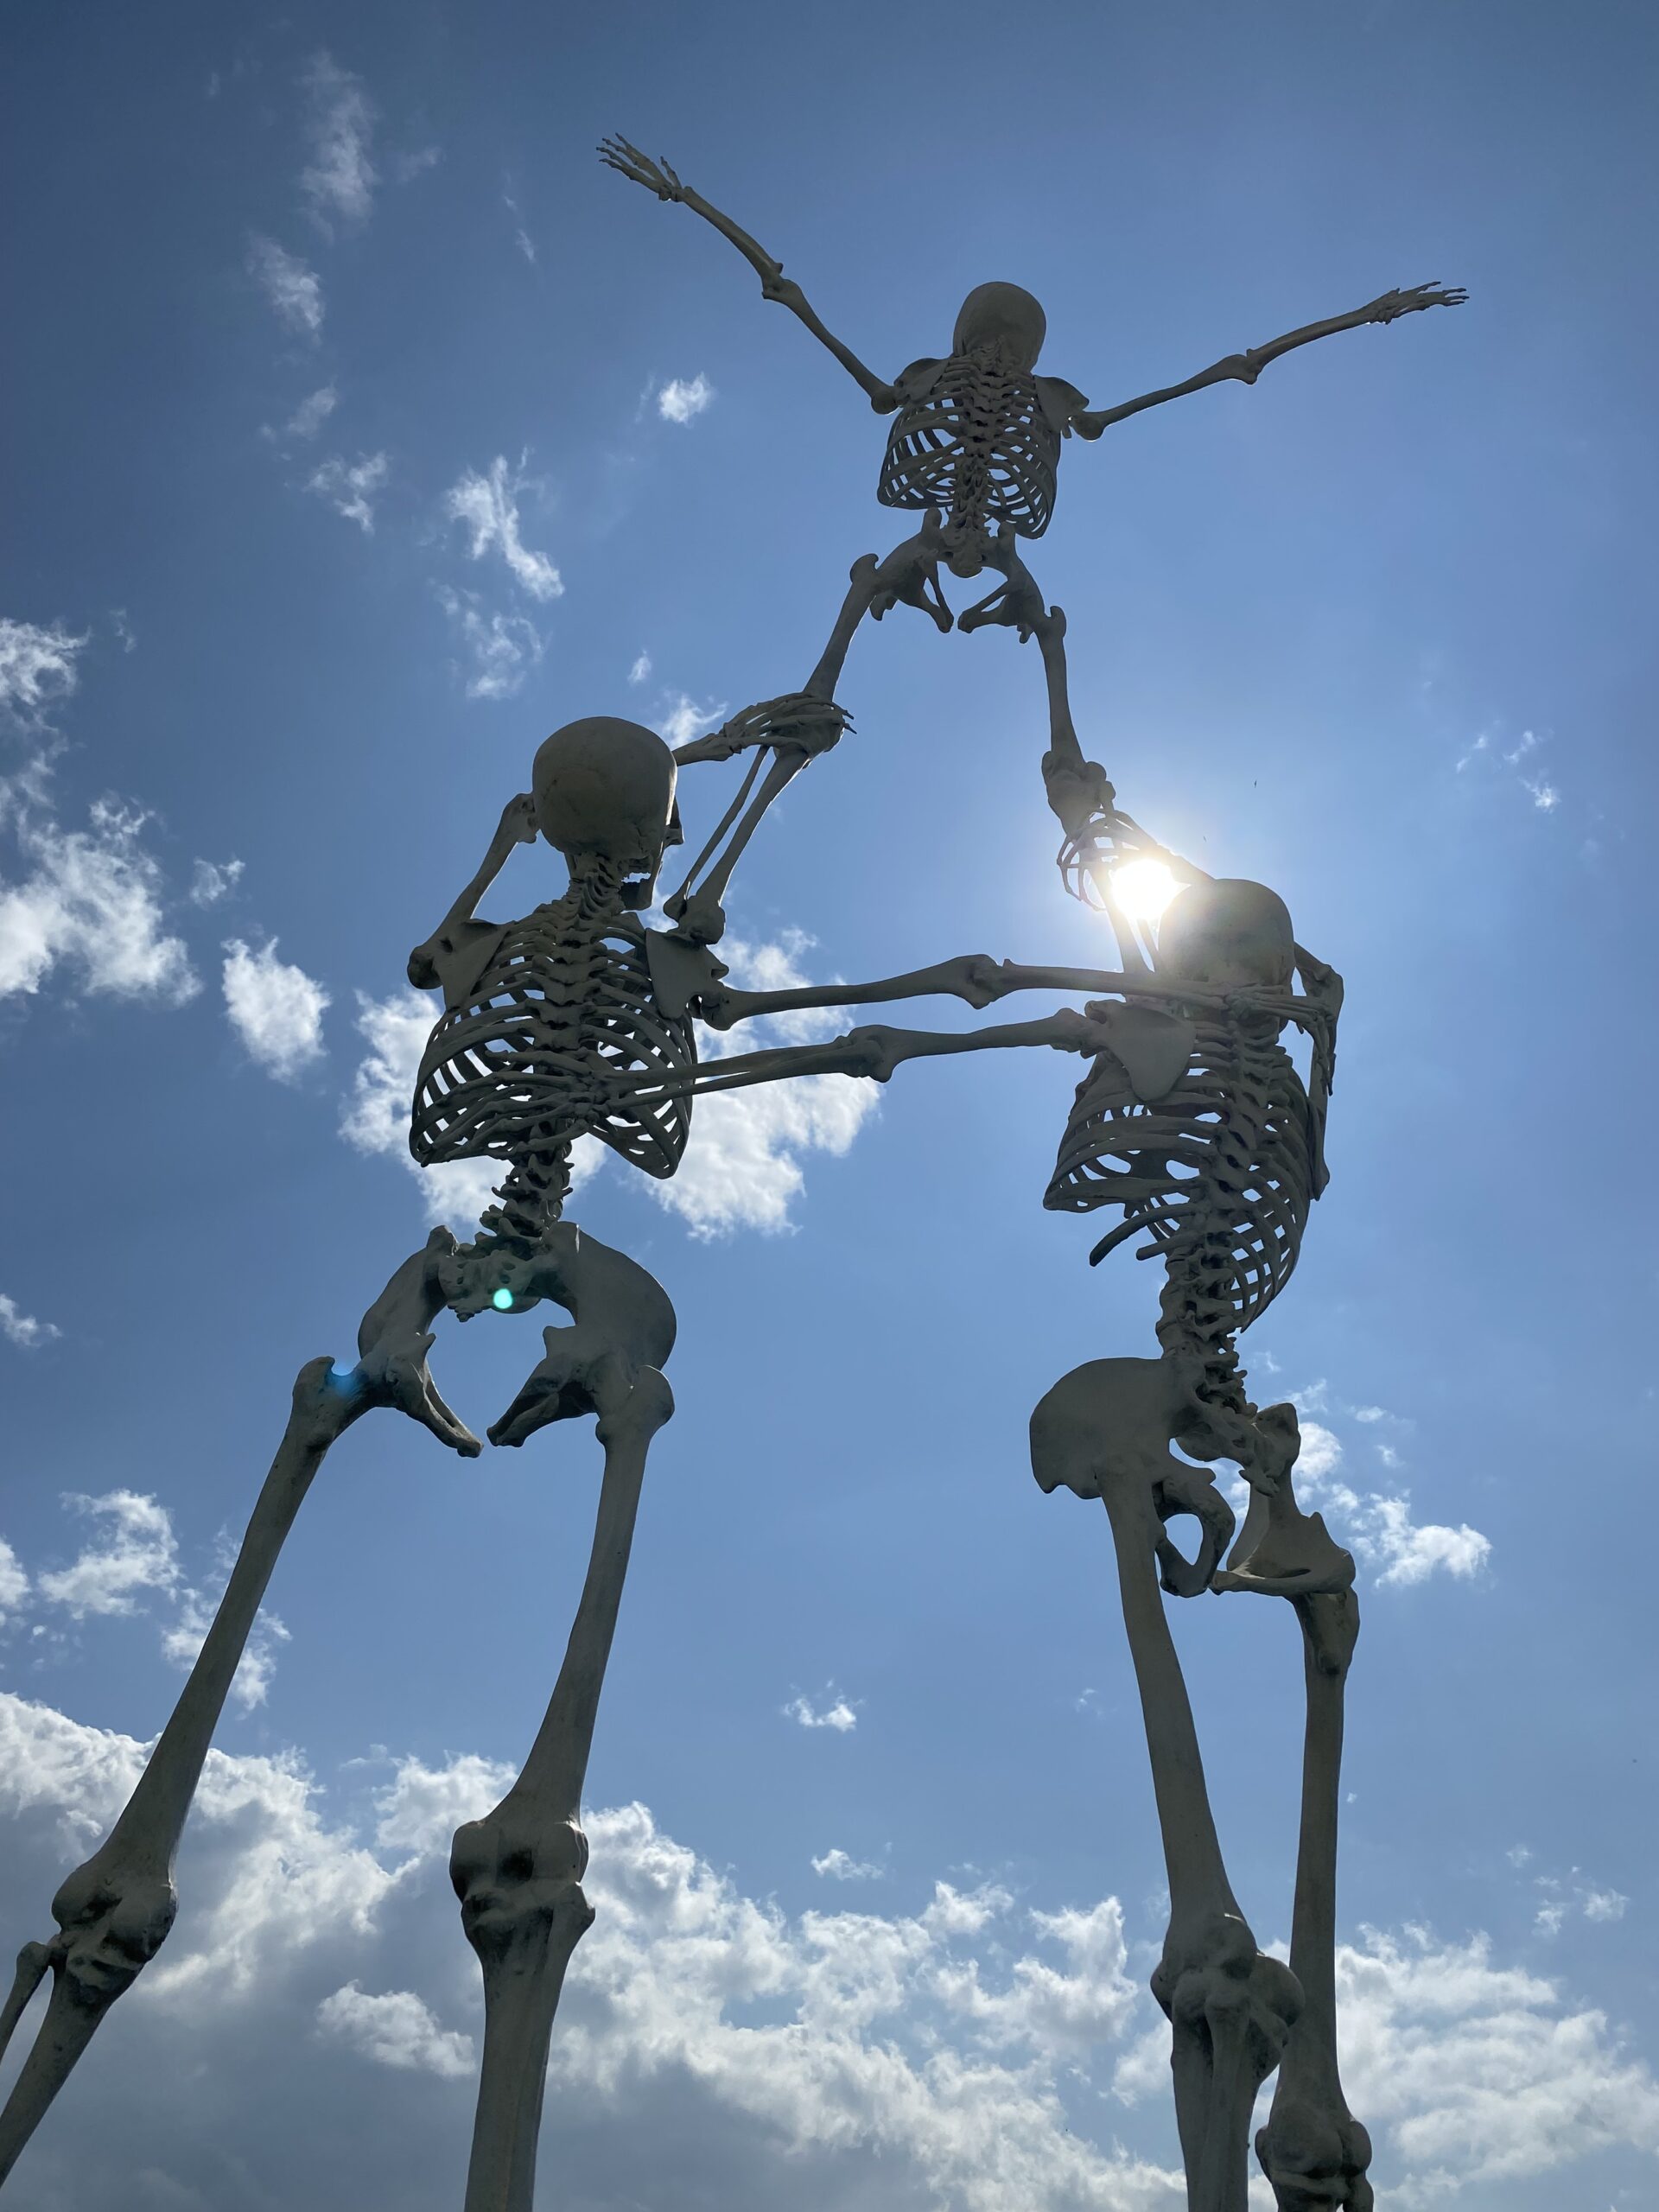 Acrobats Skeleton Sculpture by Wilfred Pritchard from The Sculpture Park at Glastonbury, back view